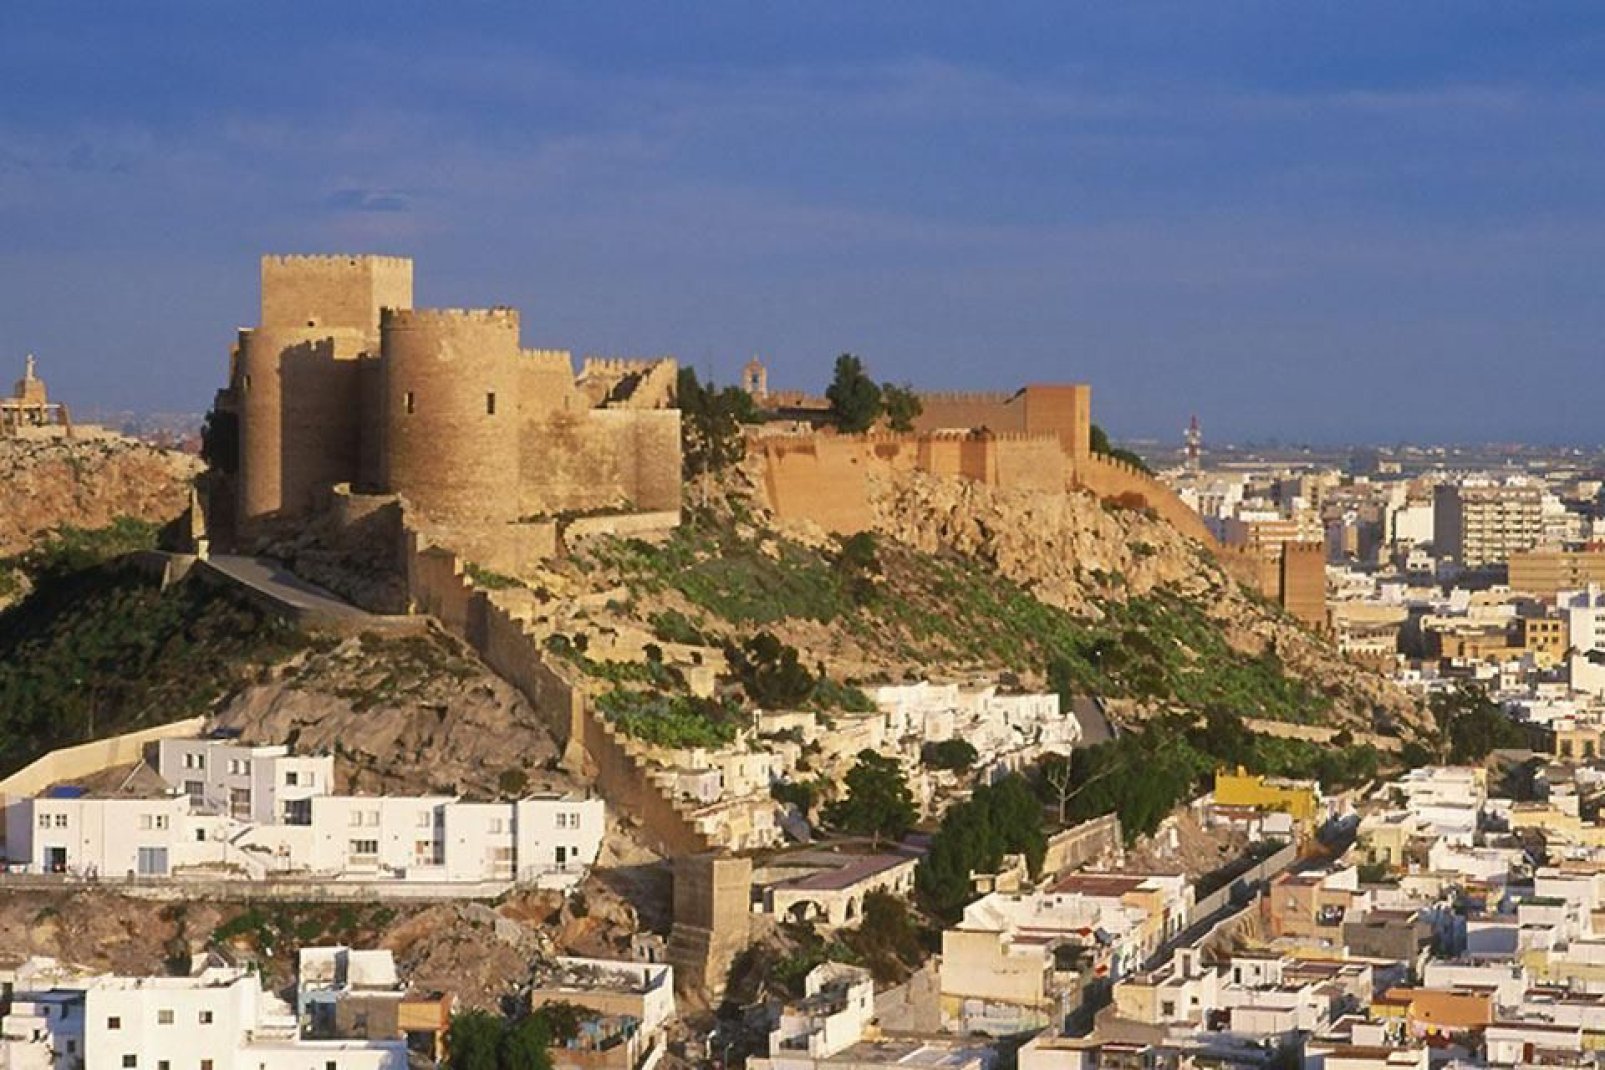 This fortress dates from the 13th century and is the largest one in Andalusia. Its imposing walls and splendid gardens are really worth the visit.